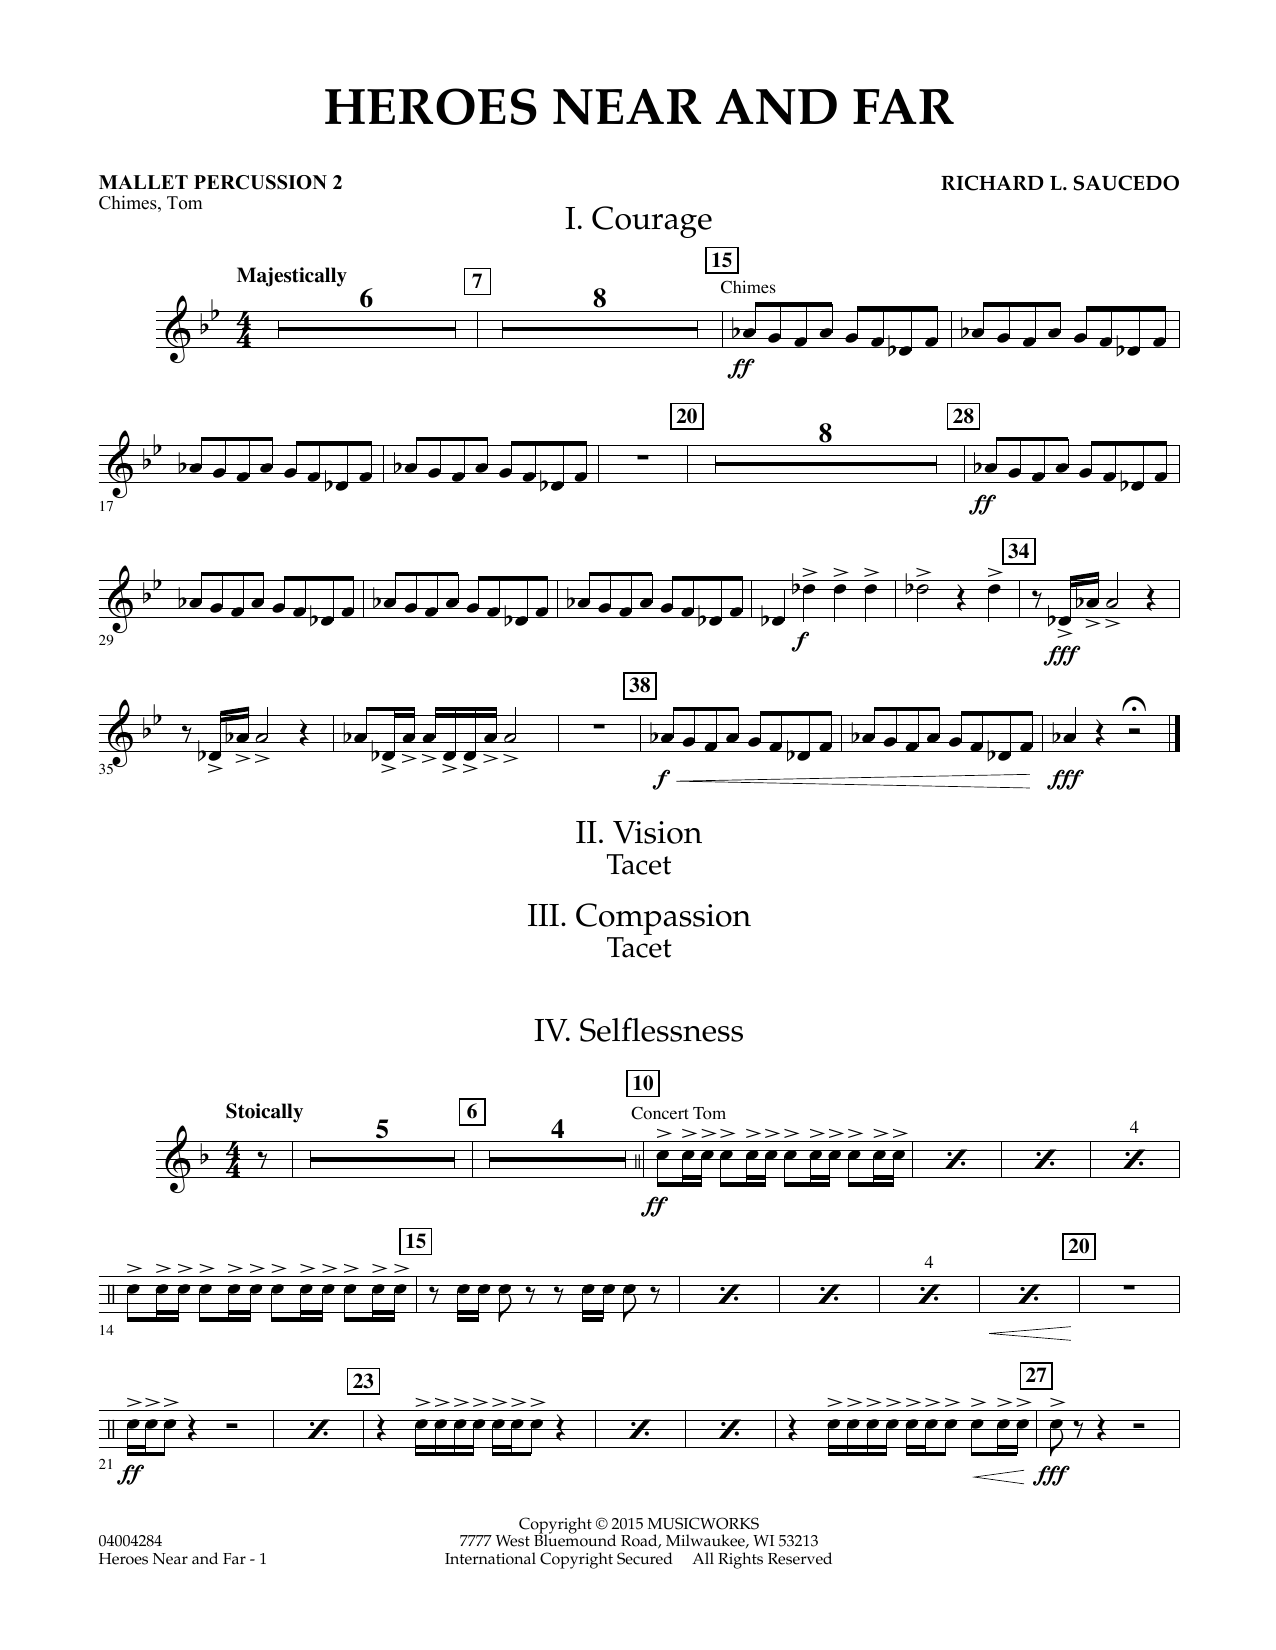 Richard L. Saucedo Heroes Near and Far - Mallet Percussion 2 sheet music notes and chords. Download Printable PDF.